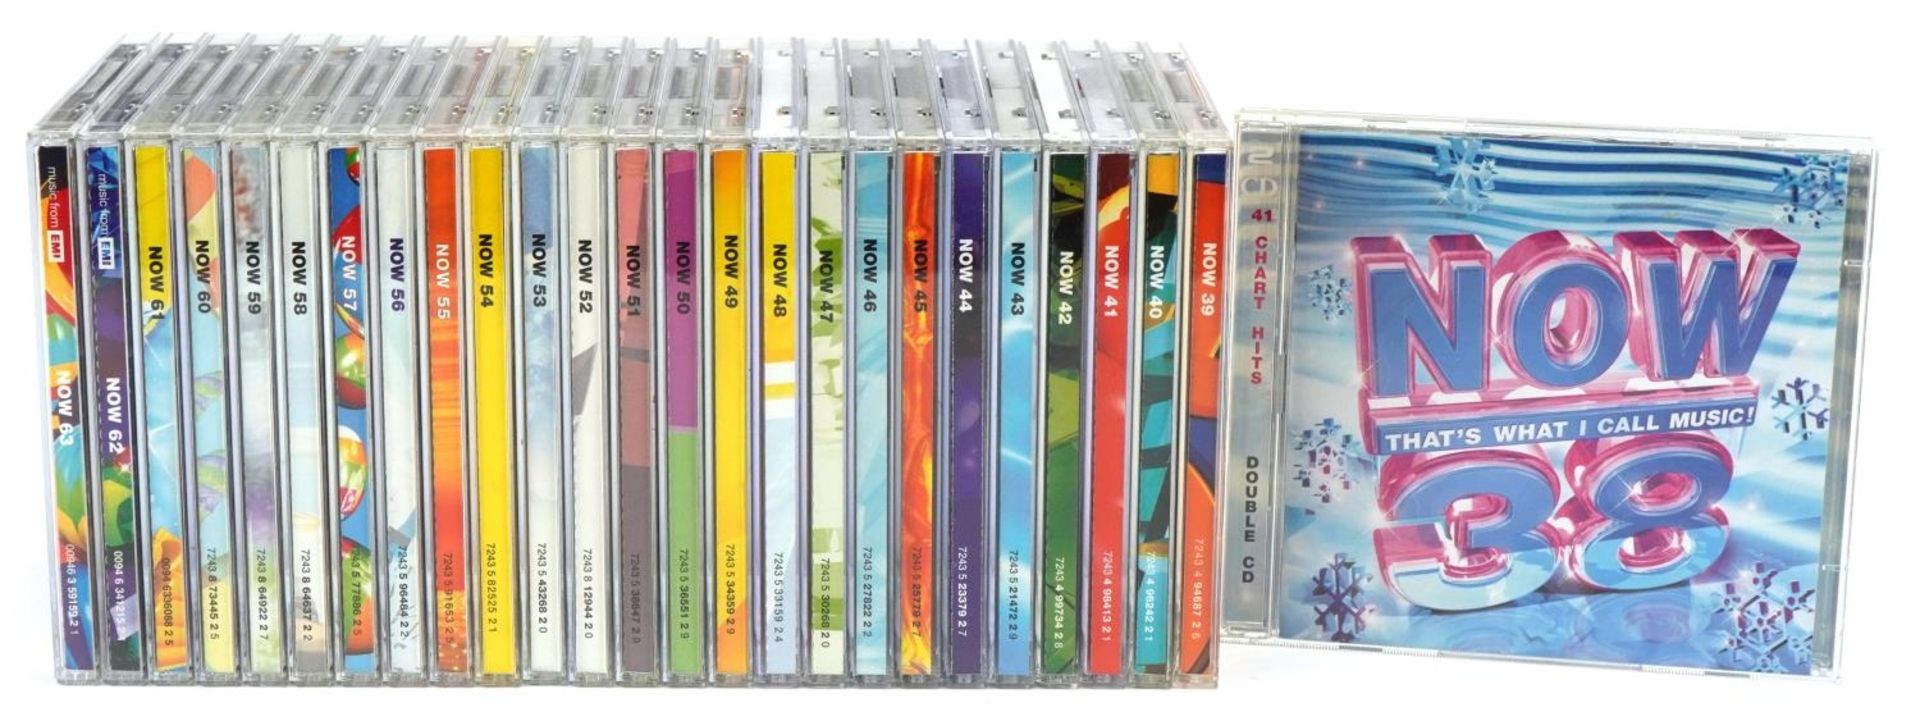 Now That's What I Call Music CDs, 38-63, twenty six in total